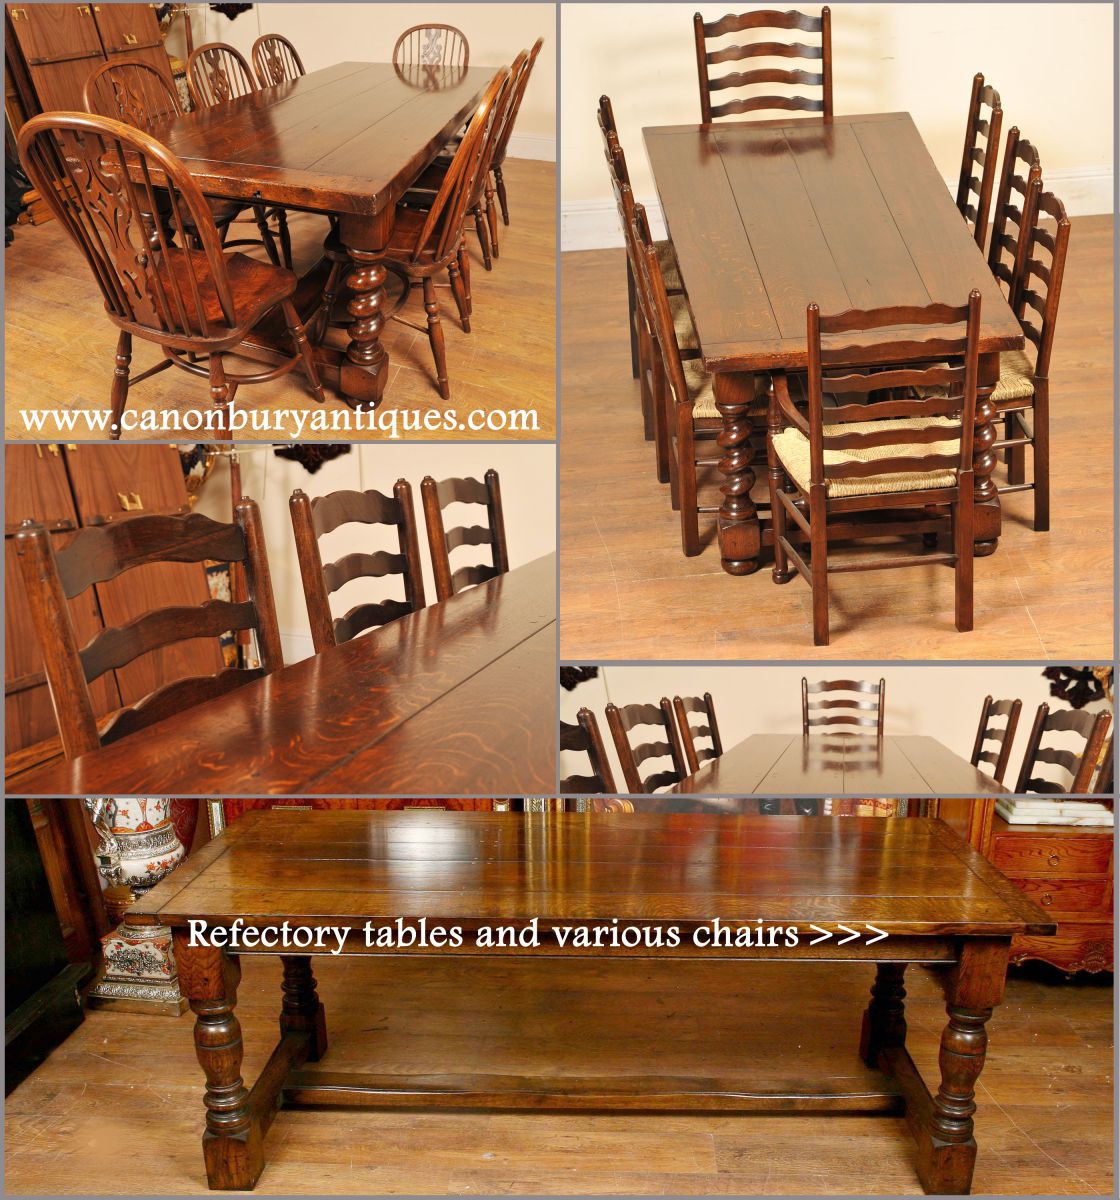 The refectory dining set, equally fab with Windsor, ladderback or spindle back chairs around